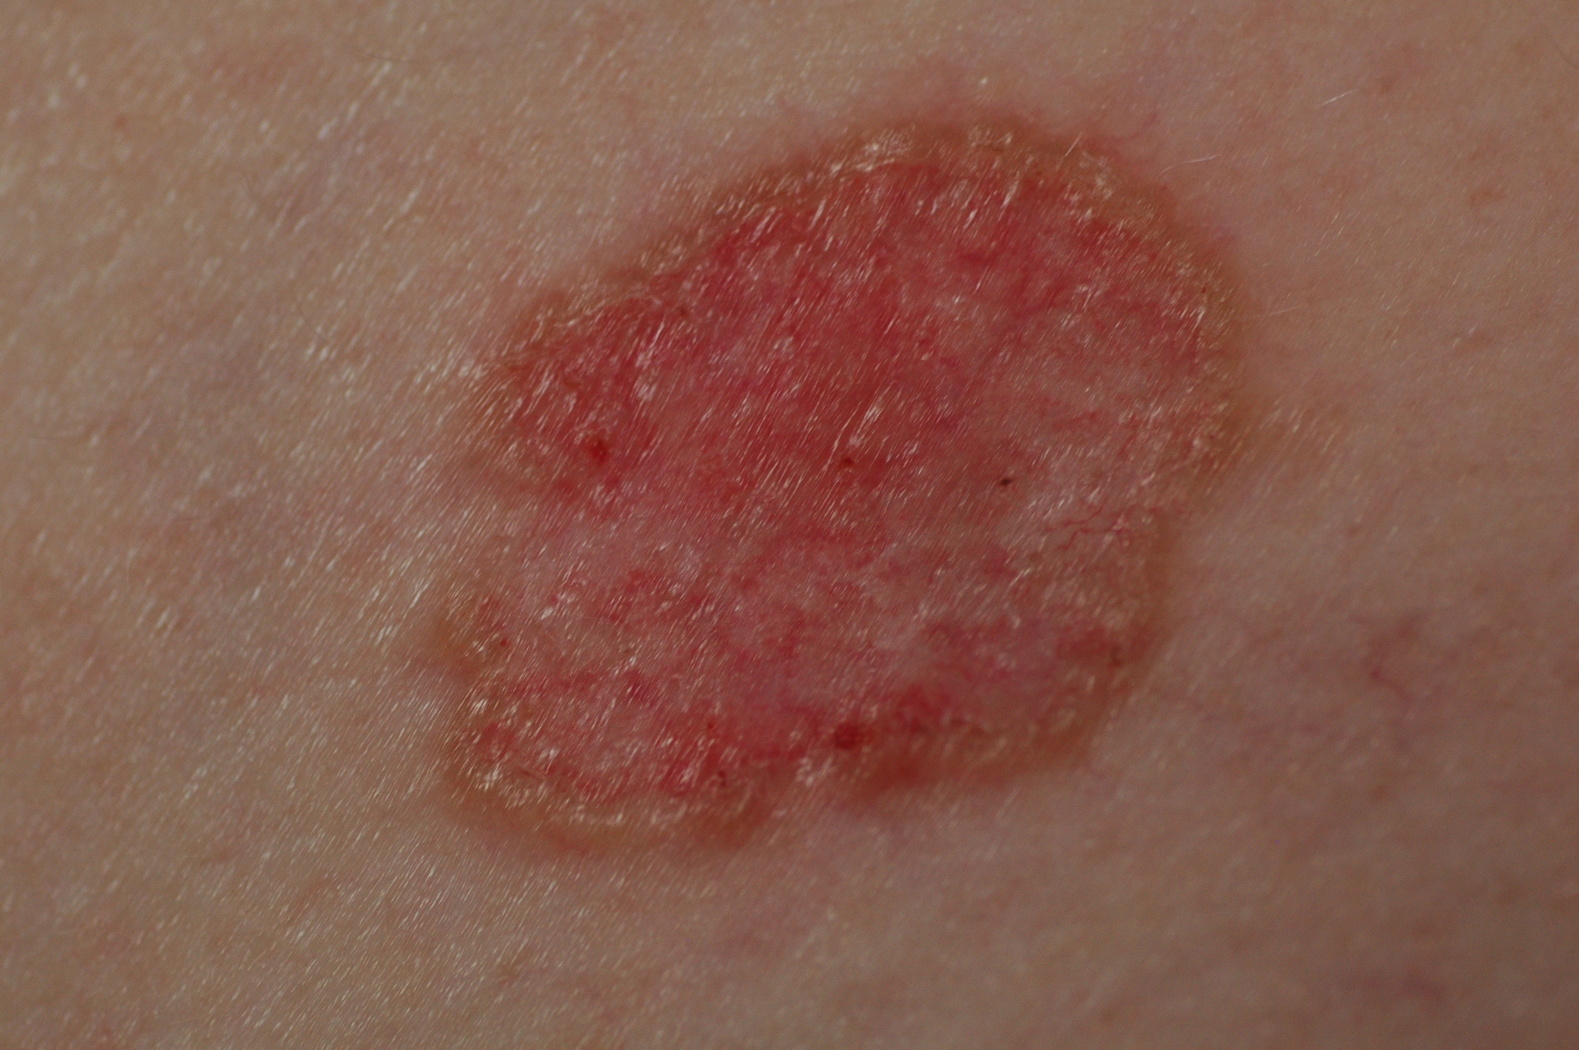 Early Stage Basal Cell Carcinoma Images